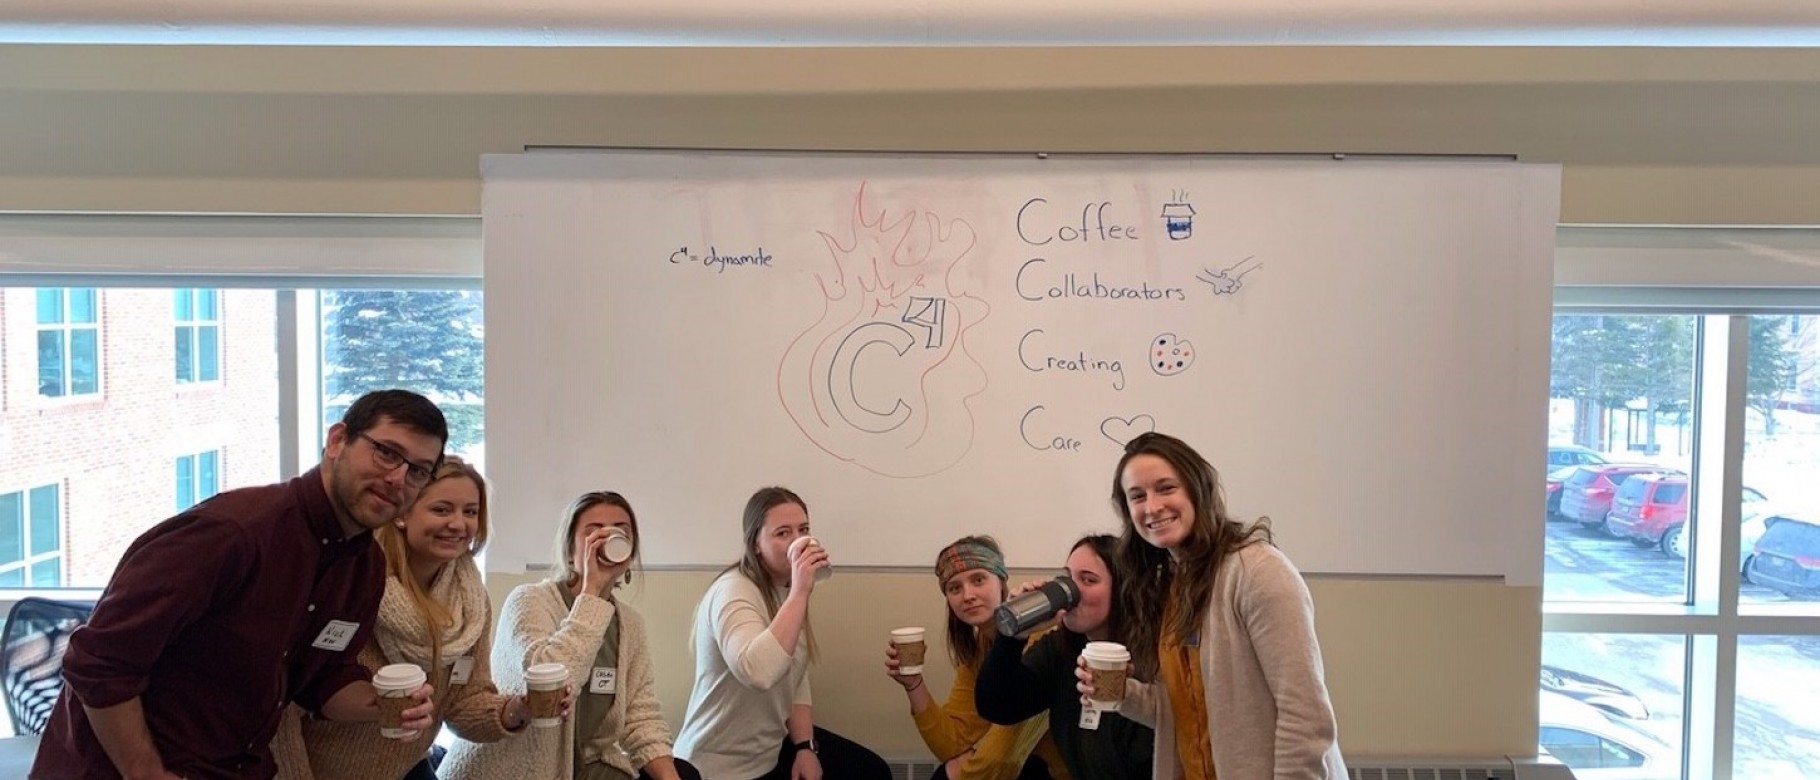 The "Coffee Collaborators Creating Care" group presented at the CECE virtual student poster session on May 6.